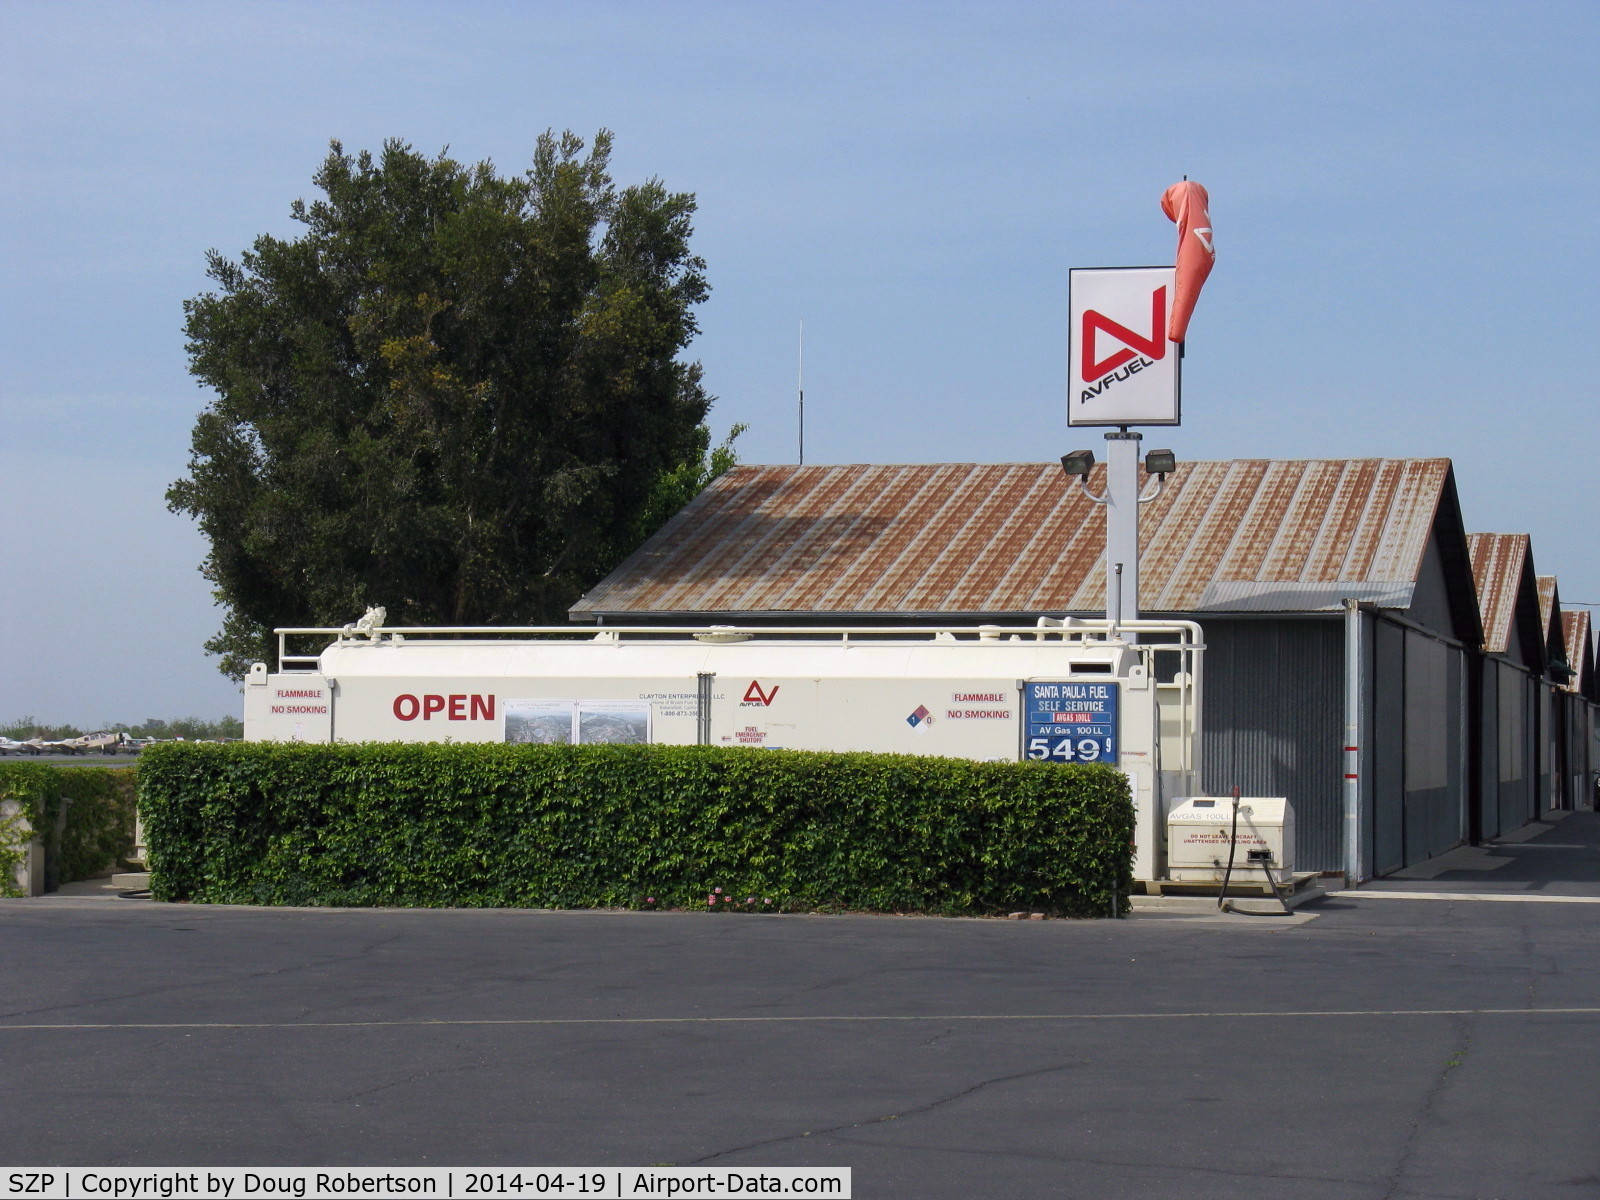 Santa Paula Airport (SZP) - Self-service Dual Station Fuel Dock 100LL, open 24 hours. Note changed fuel price/gallon.